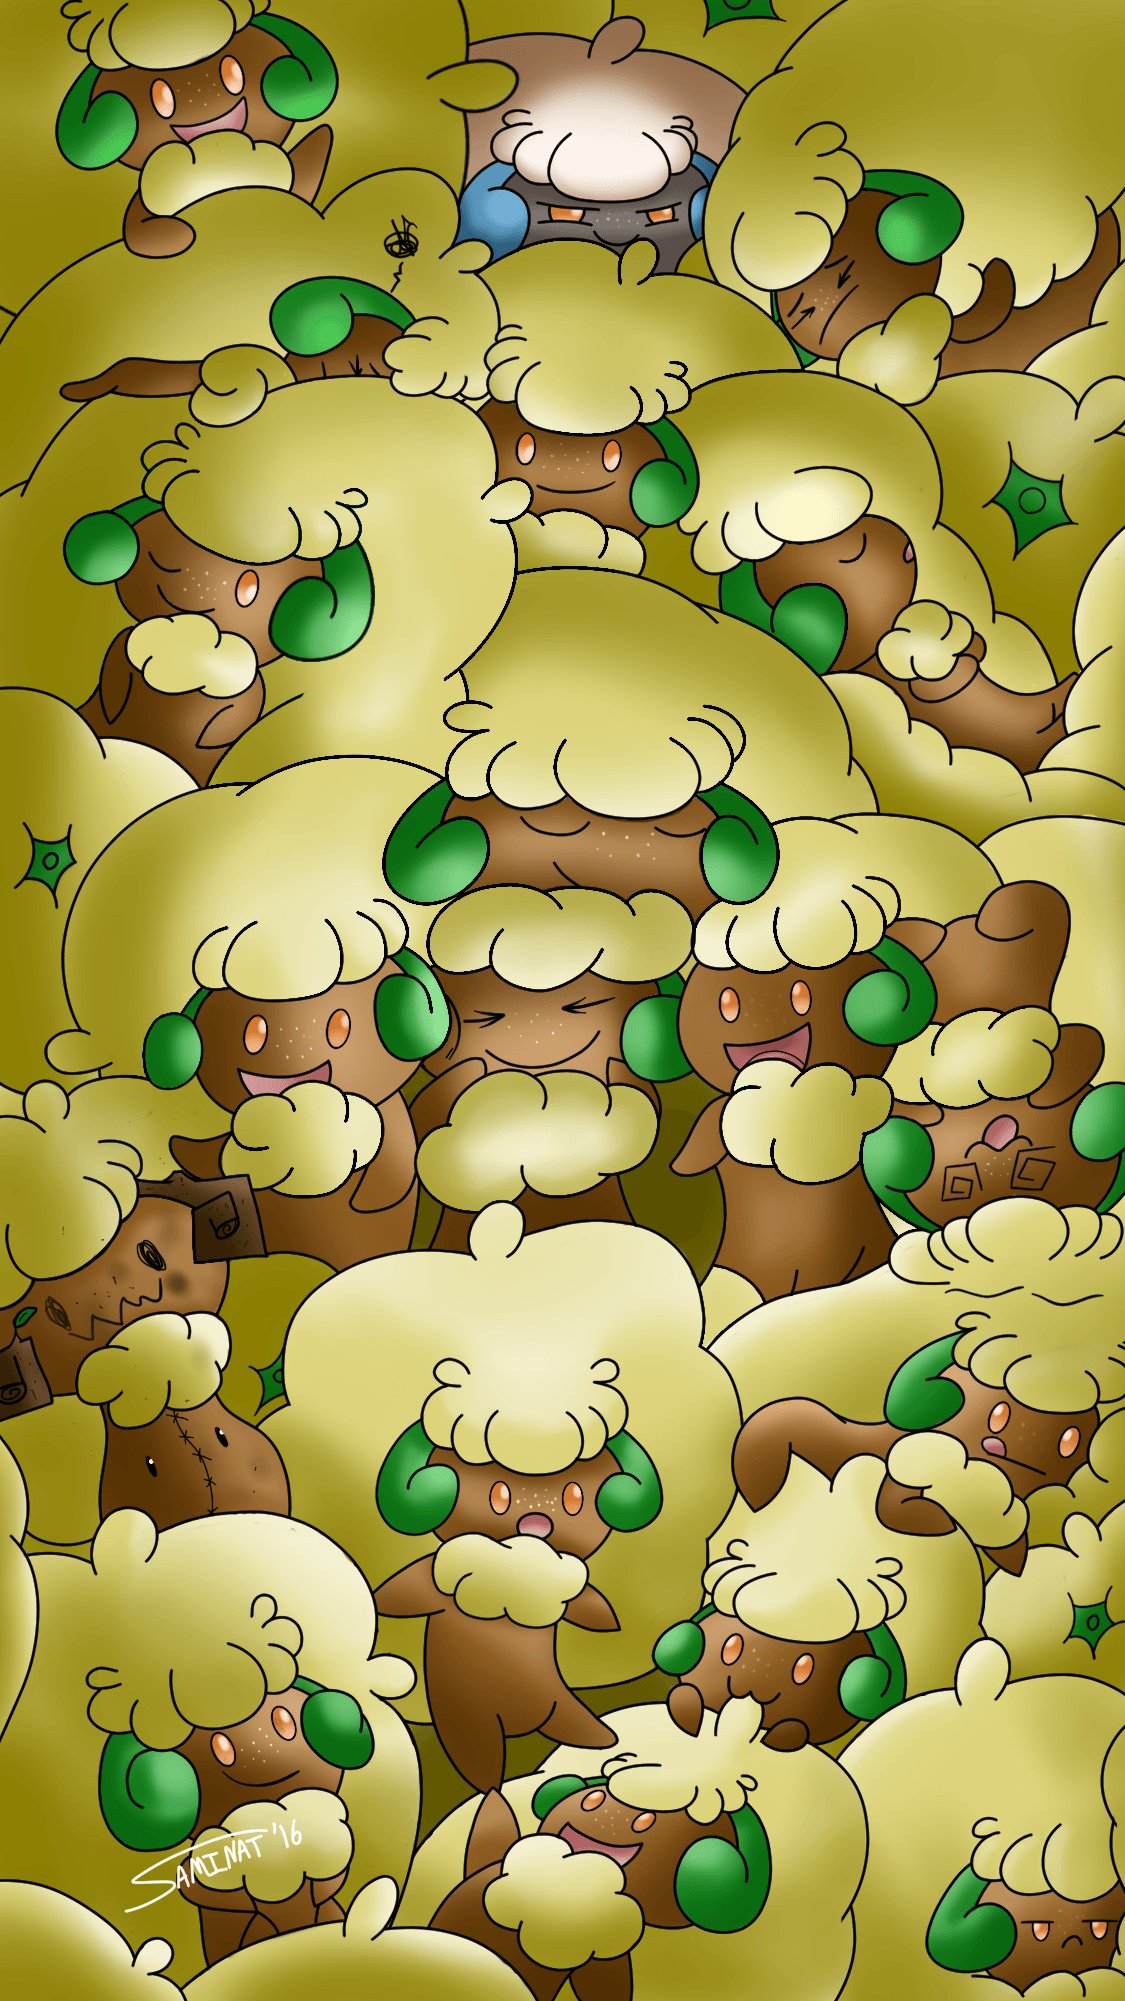 A Whimsy of Whimsicott by Saminat on Newgrounds